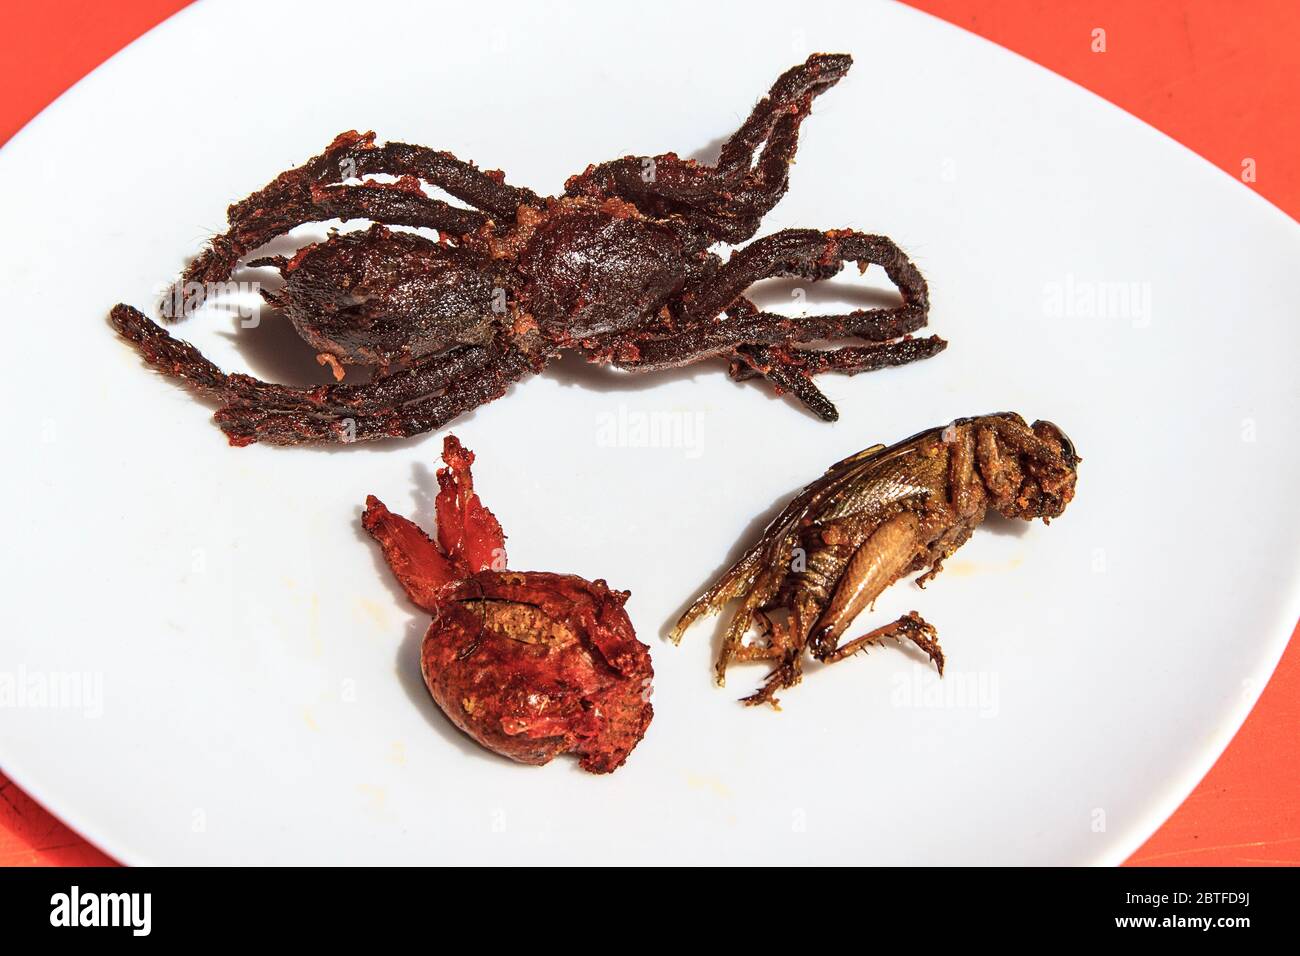 Breaded and deep fried tarantula along with a tiny frog and large grasshopper are displayed on a plate before being eaten. For sale at Skuon Stock Photo